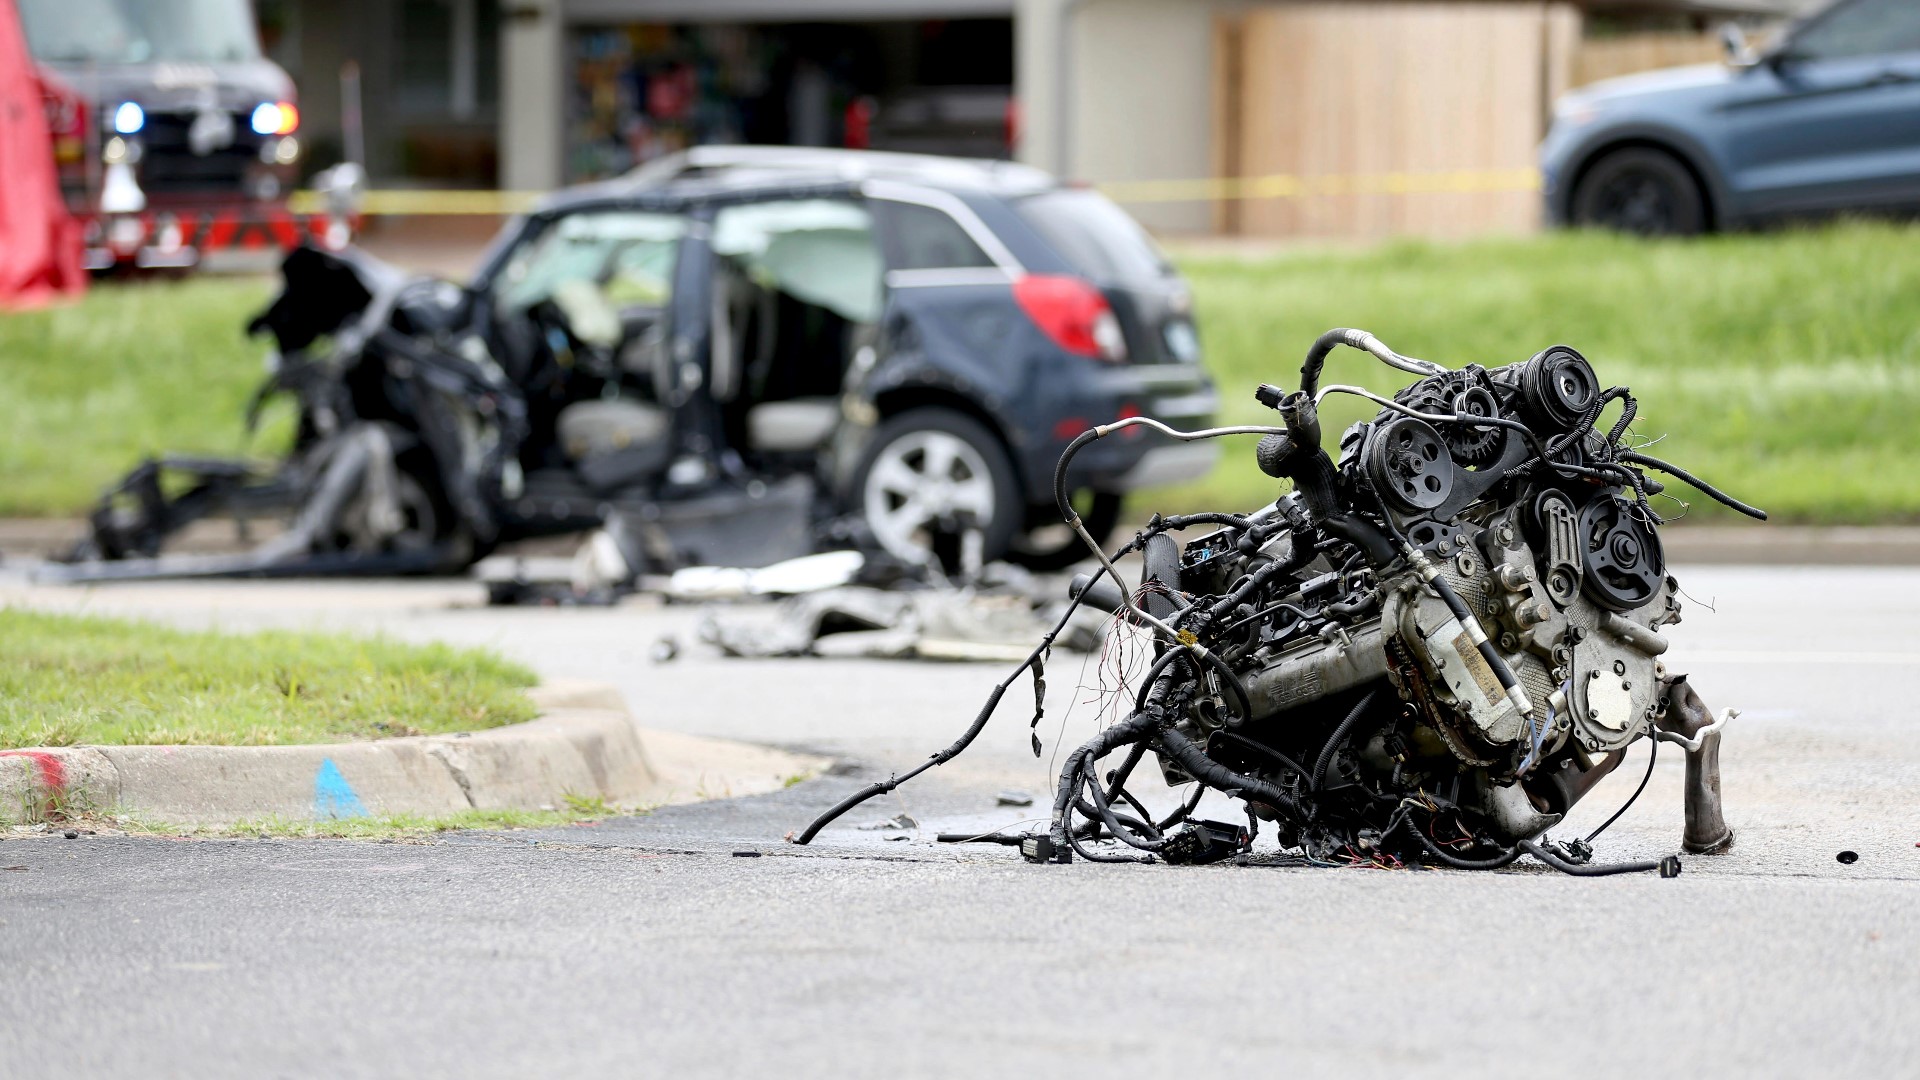 Car crashes are the leading cause of death among teenagers, according to the Insurance Institute for Highway Safety.